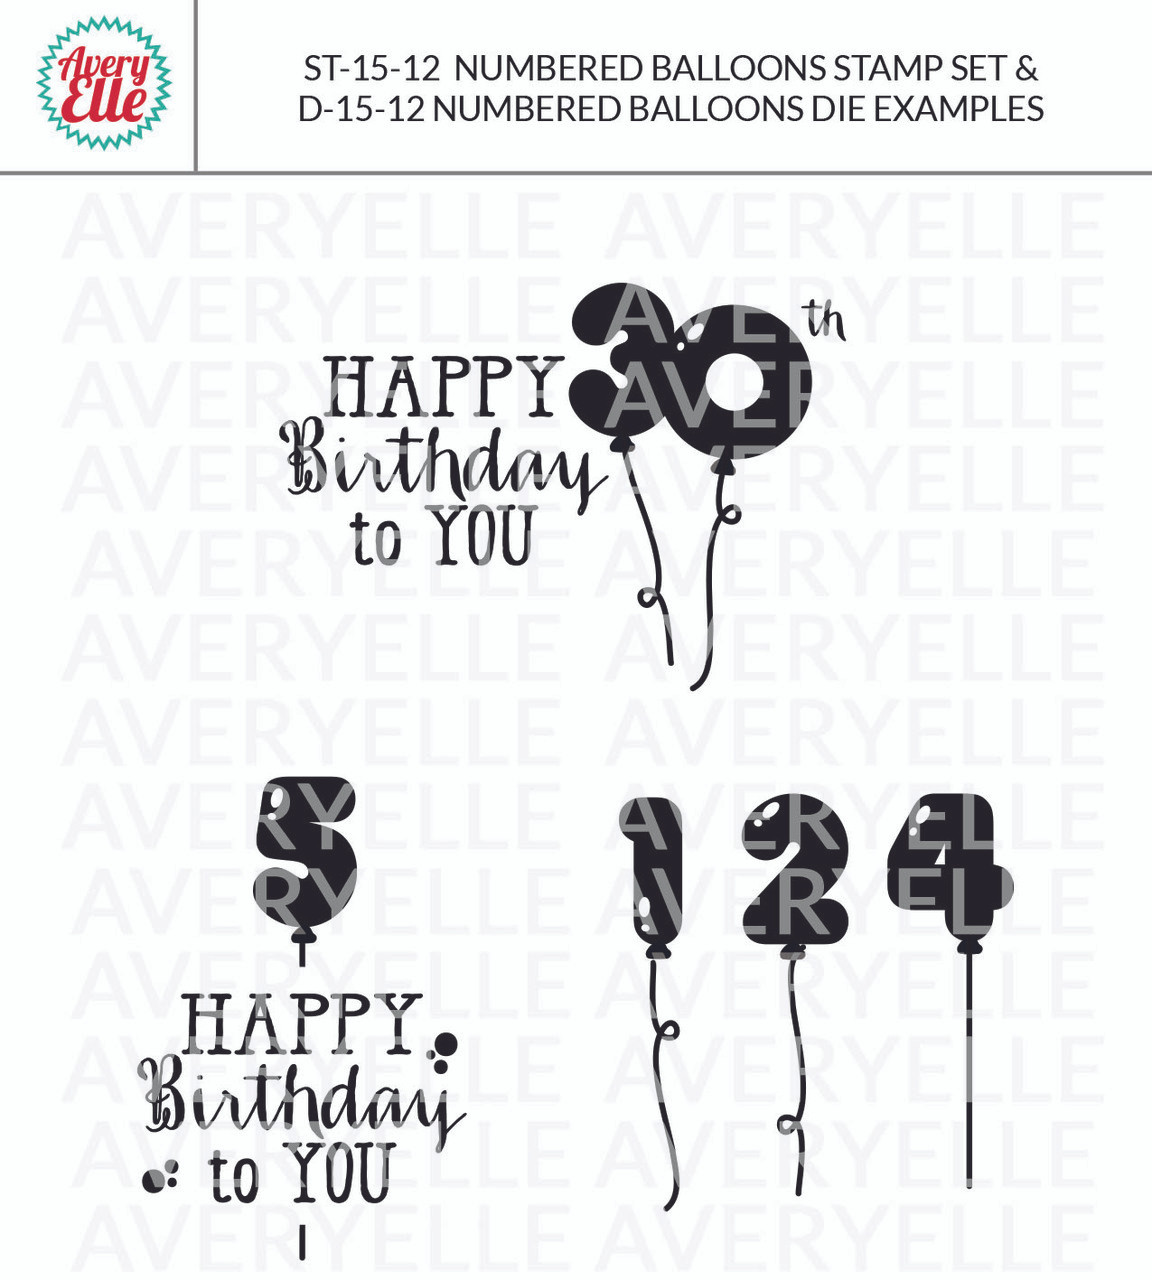 Numbered Balloons by Avery Elle Inc. examples